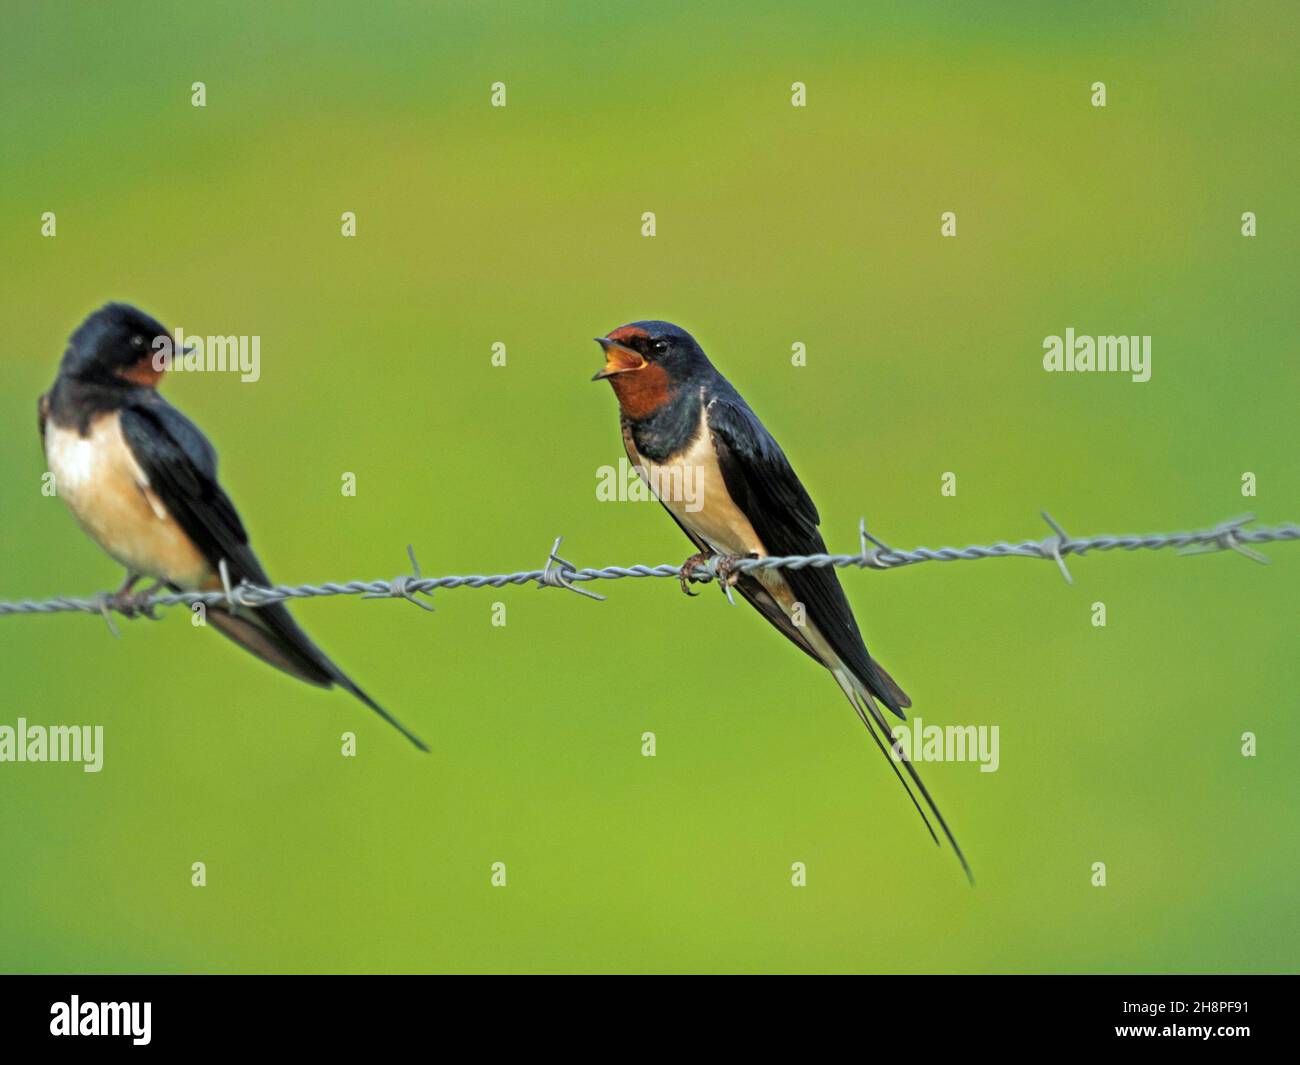 2 interacting Barn Swallows (Hirundo rustica) on barbed wire (one calling other watching) - eye level - plain green background - Orkney, Scotland,UK Stock Photo